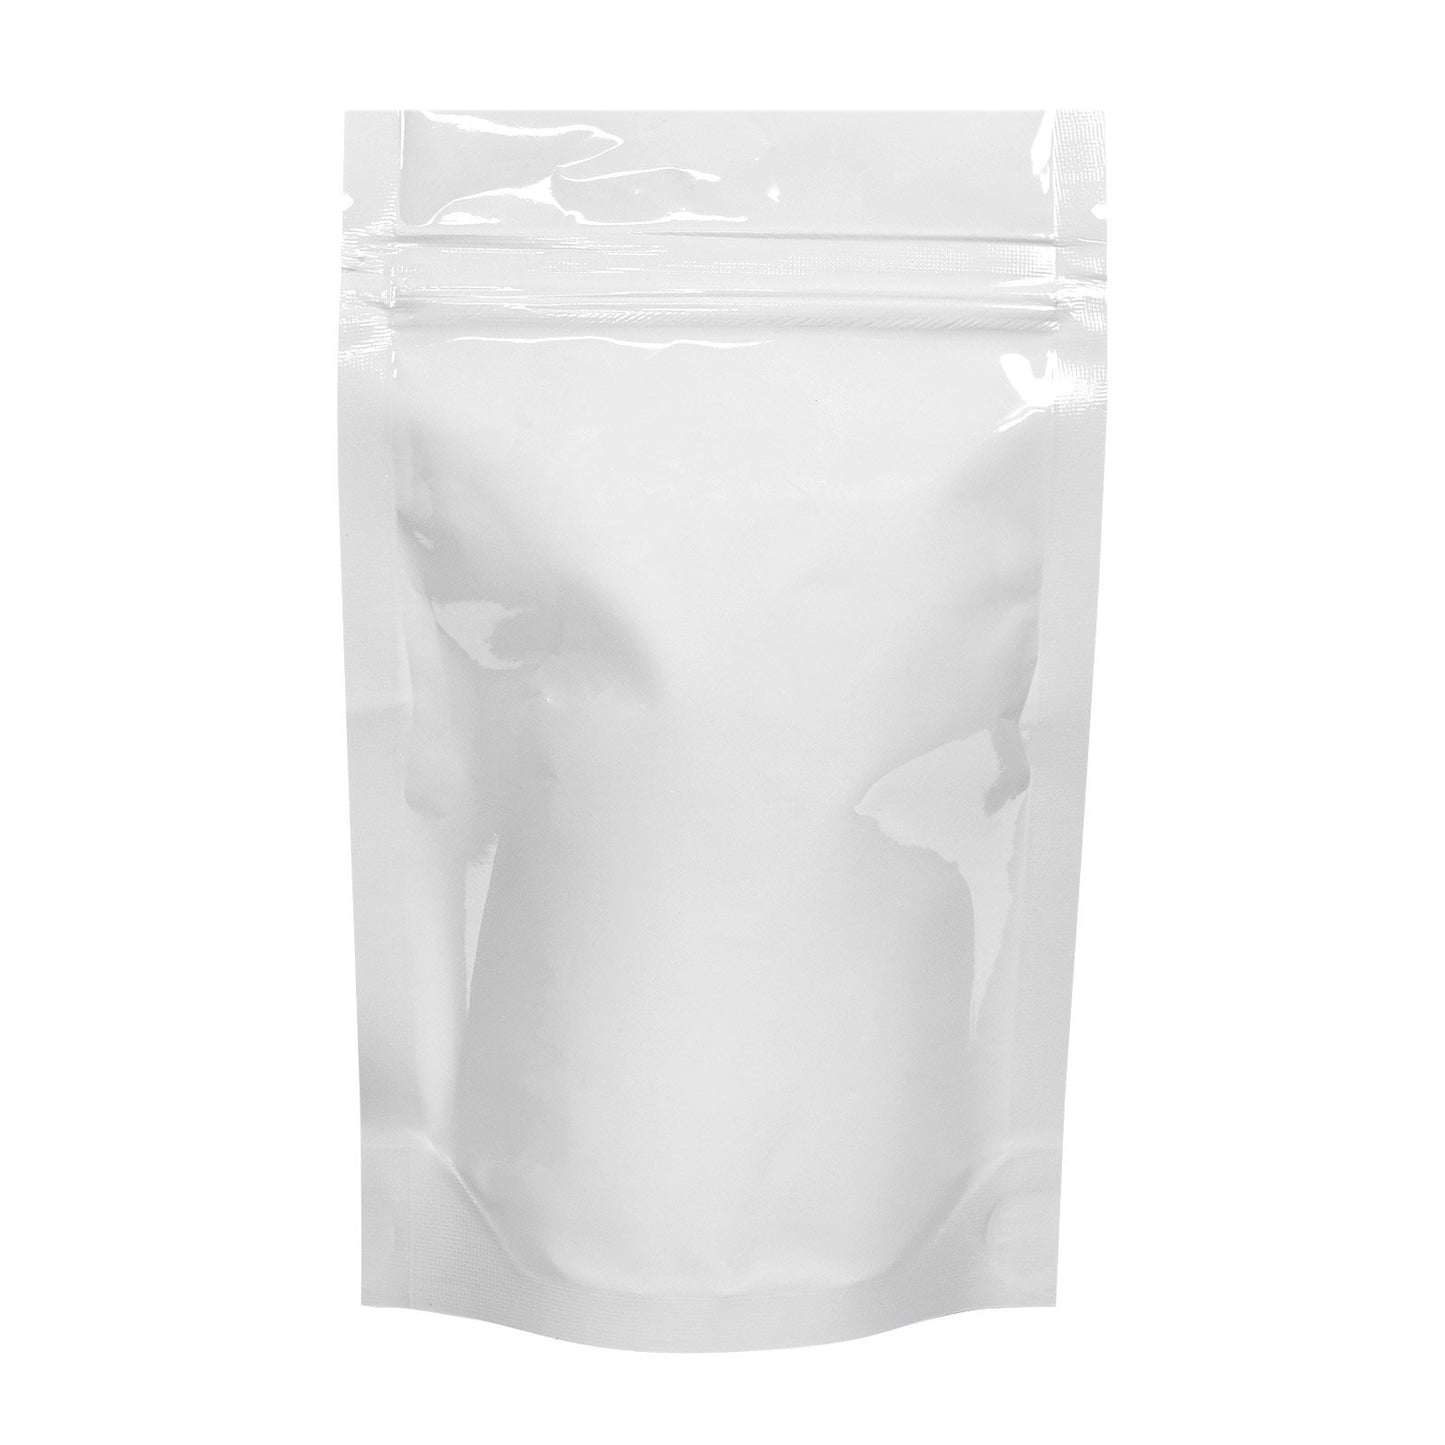 Mylar Bag Tear Notch White 1 oz 1000 COUNT at Flower Power Packages